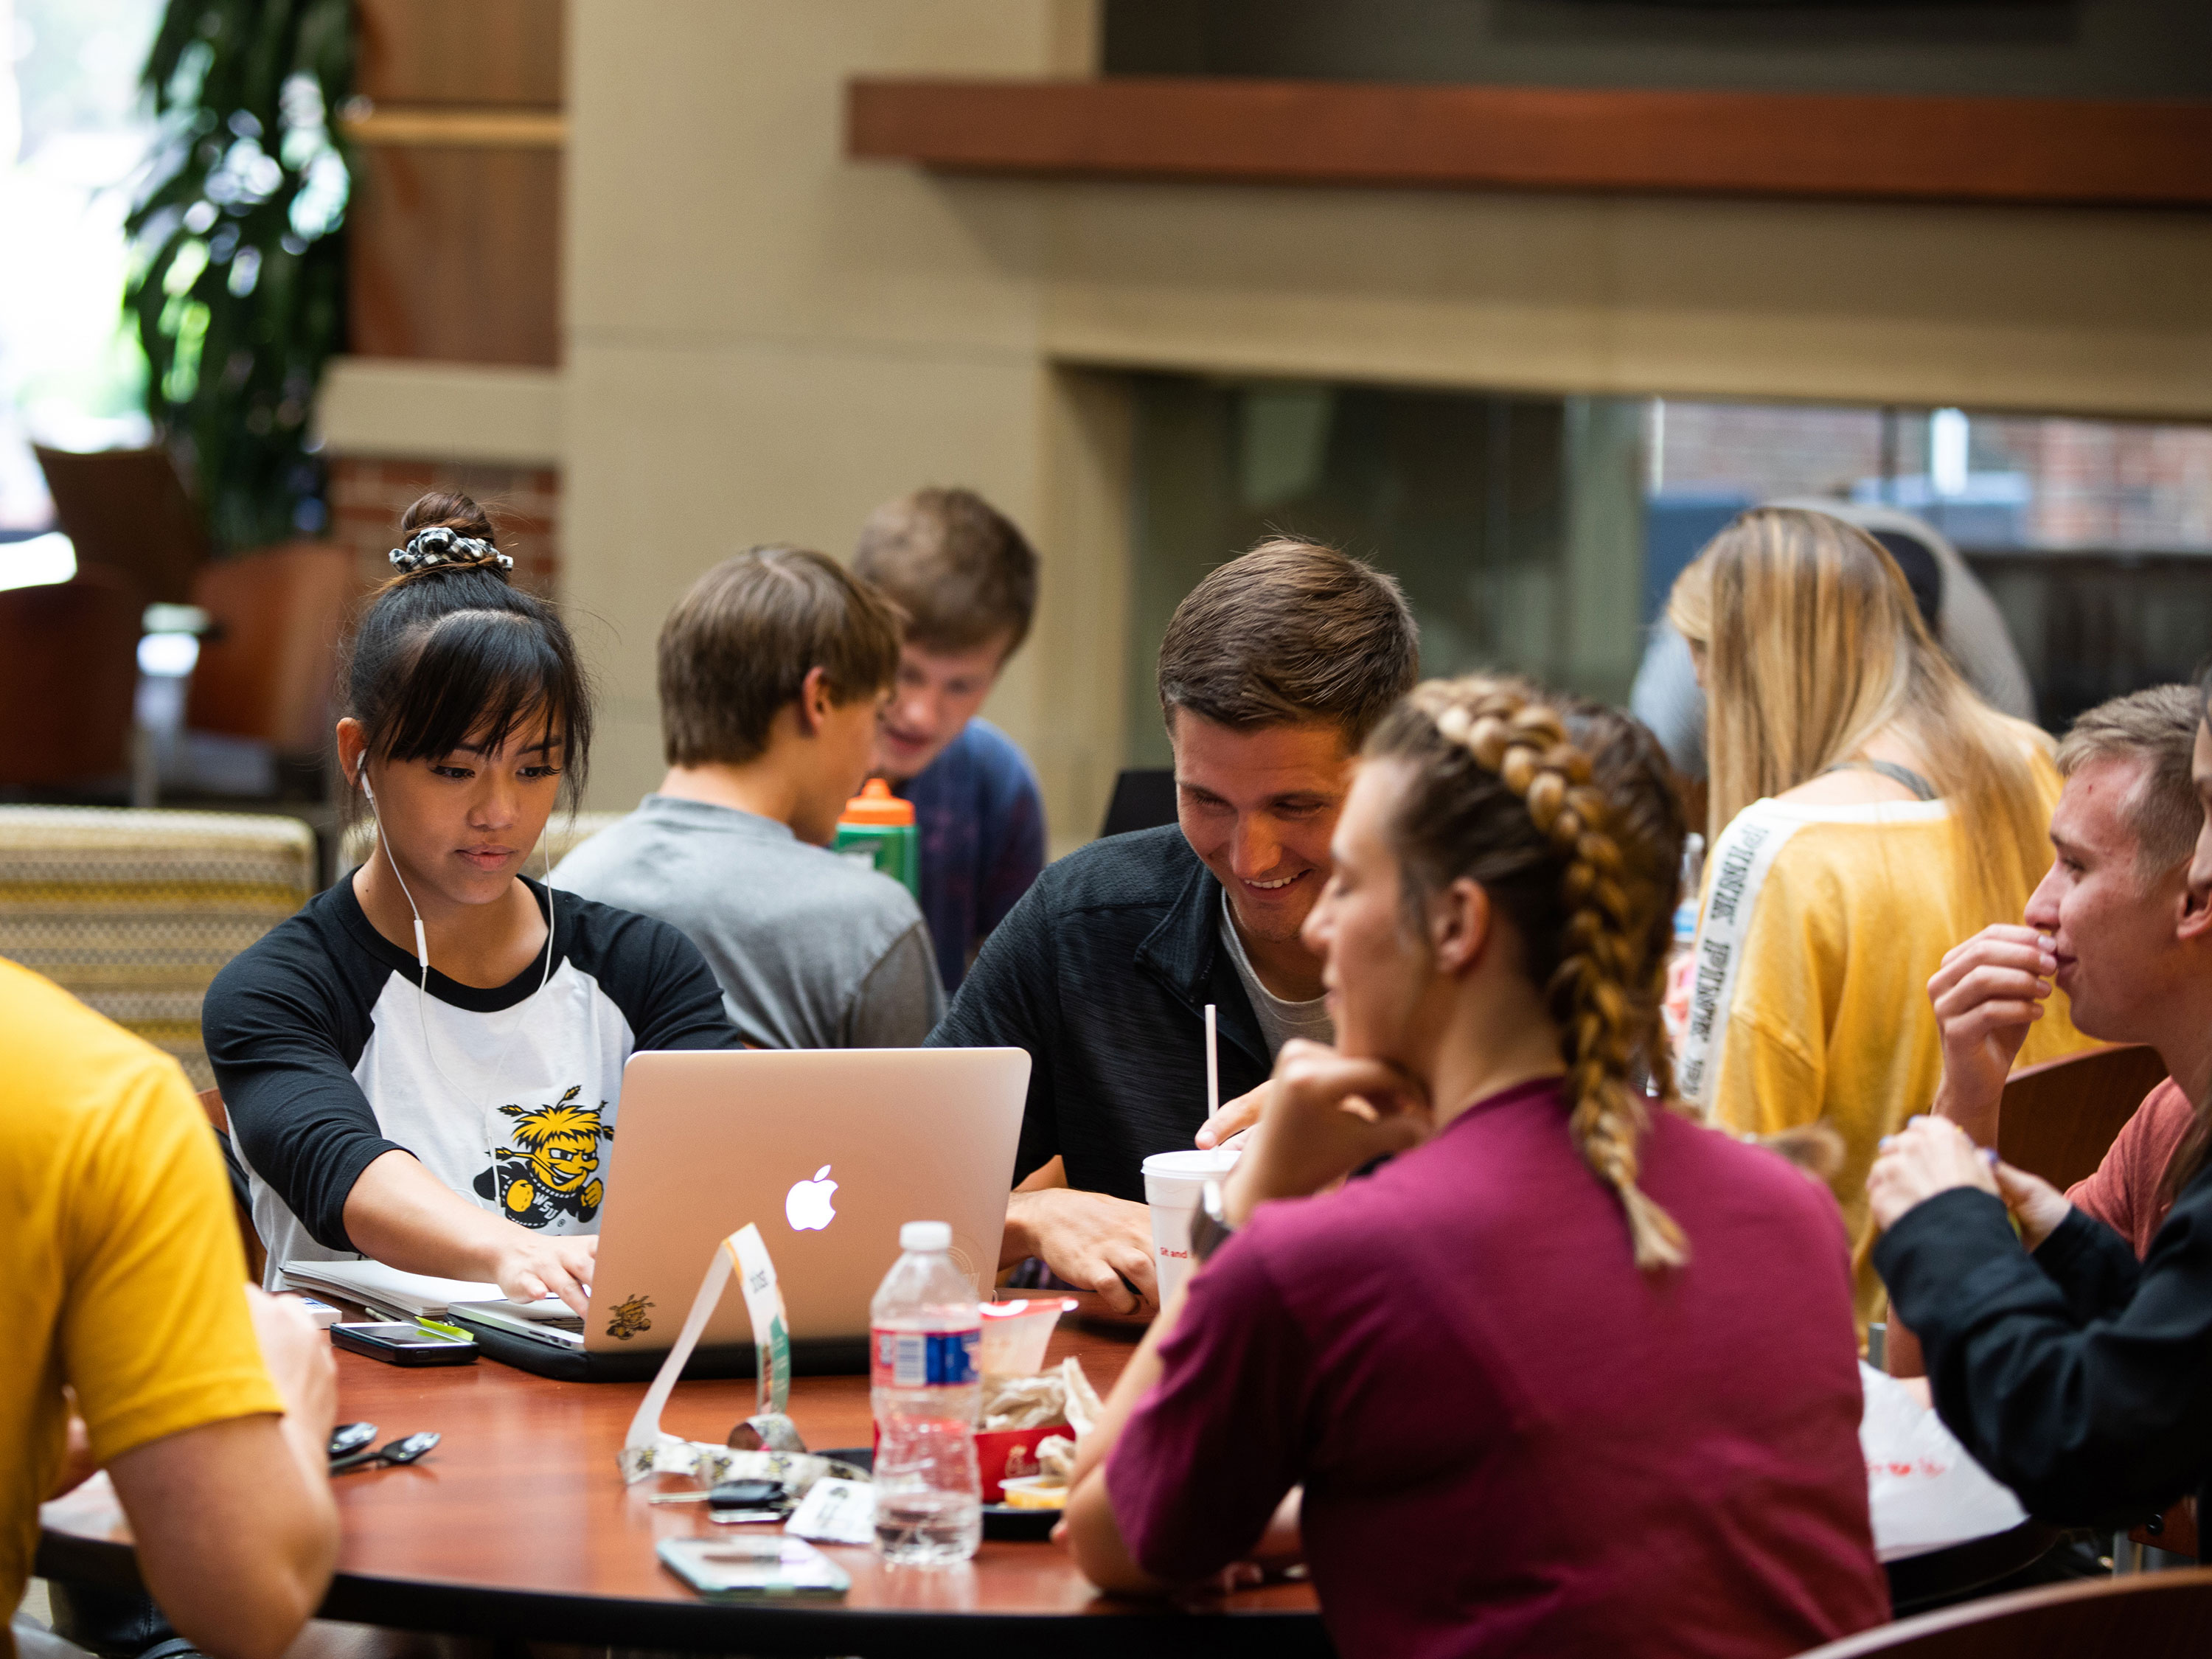 Students study in the Rhatigan Student Center